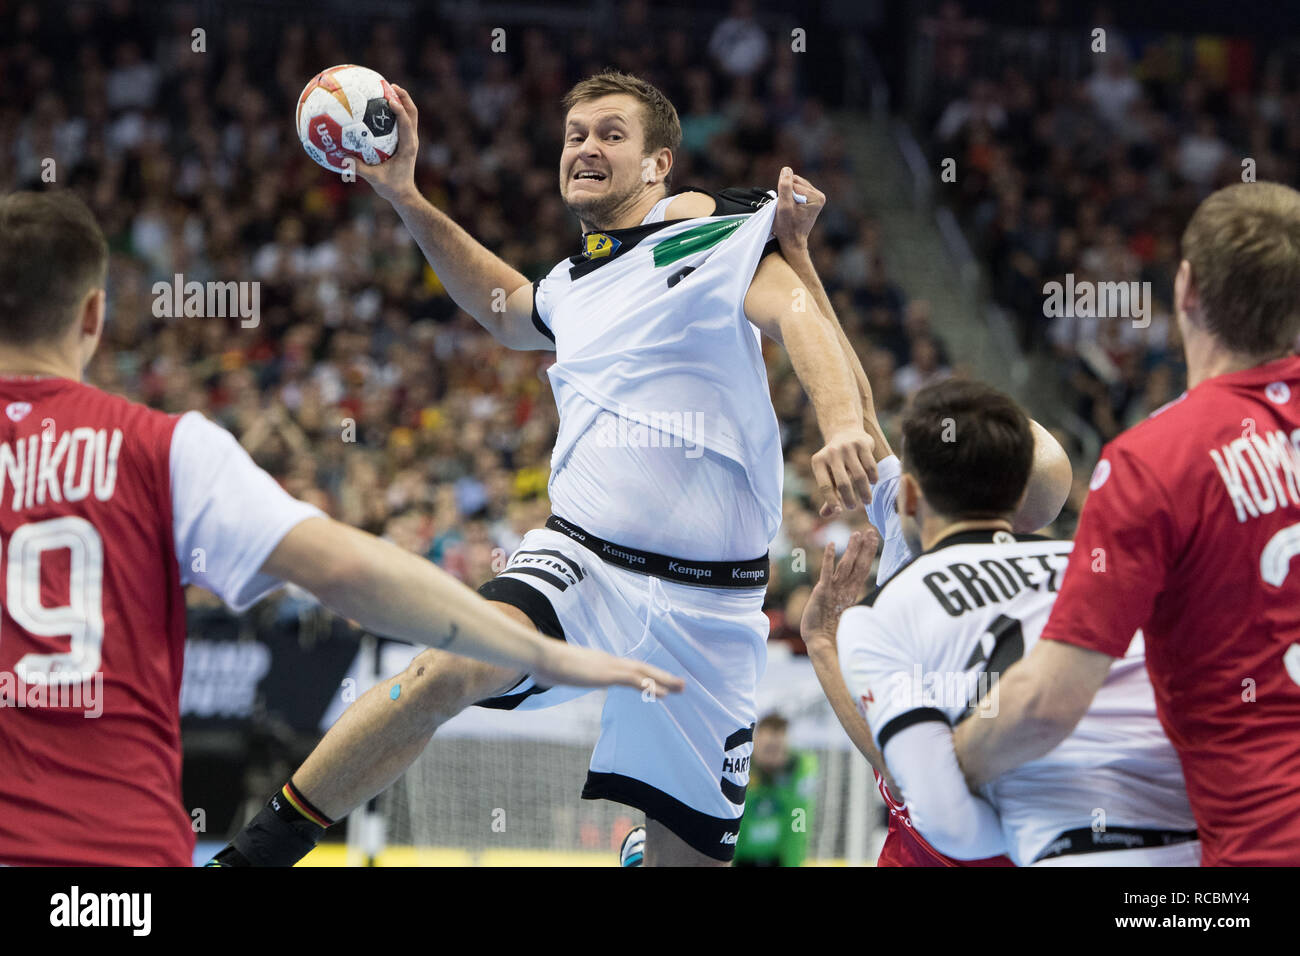 Fabian BOEHM (BÃ¶hm, GER) throws on goal, throw, goal throw, action,  preliminary round group A, Russia (RUS) - Germany (GER) 22:22, on  14.01.2019 in Berlin / Germany. Handball World Cup 2019, from